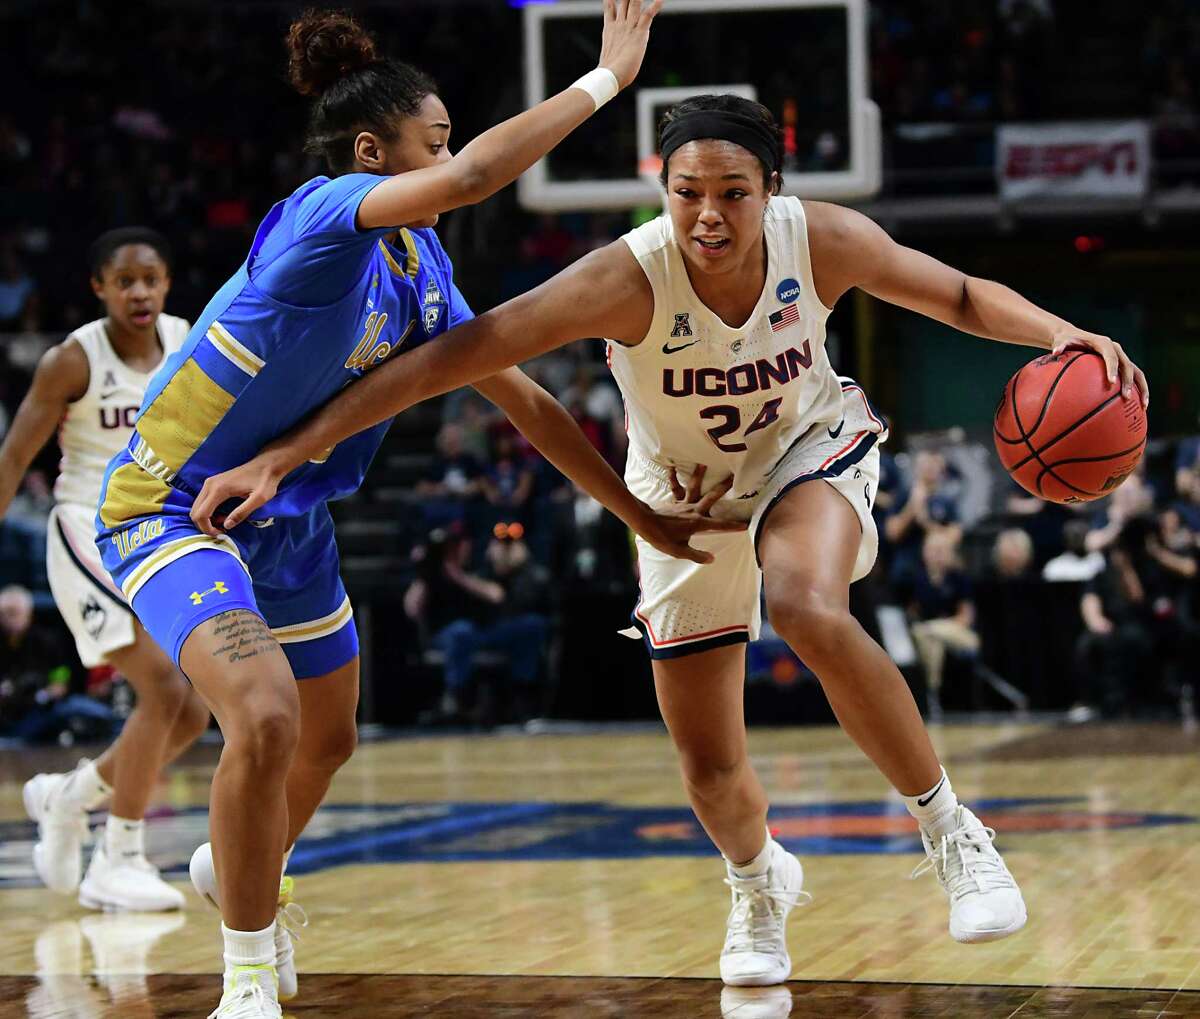 UConn’s Napheesa Collier drives to the net against UCLA’s Ahlana Smith in an NCAA Tournament semifinal game in 2019.